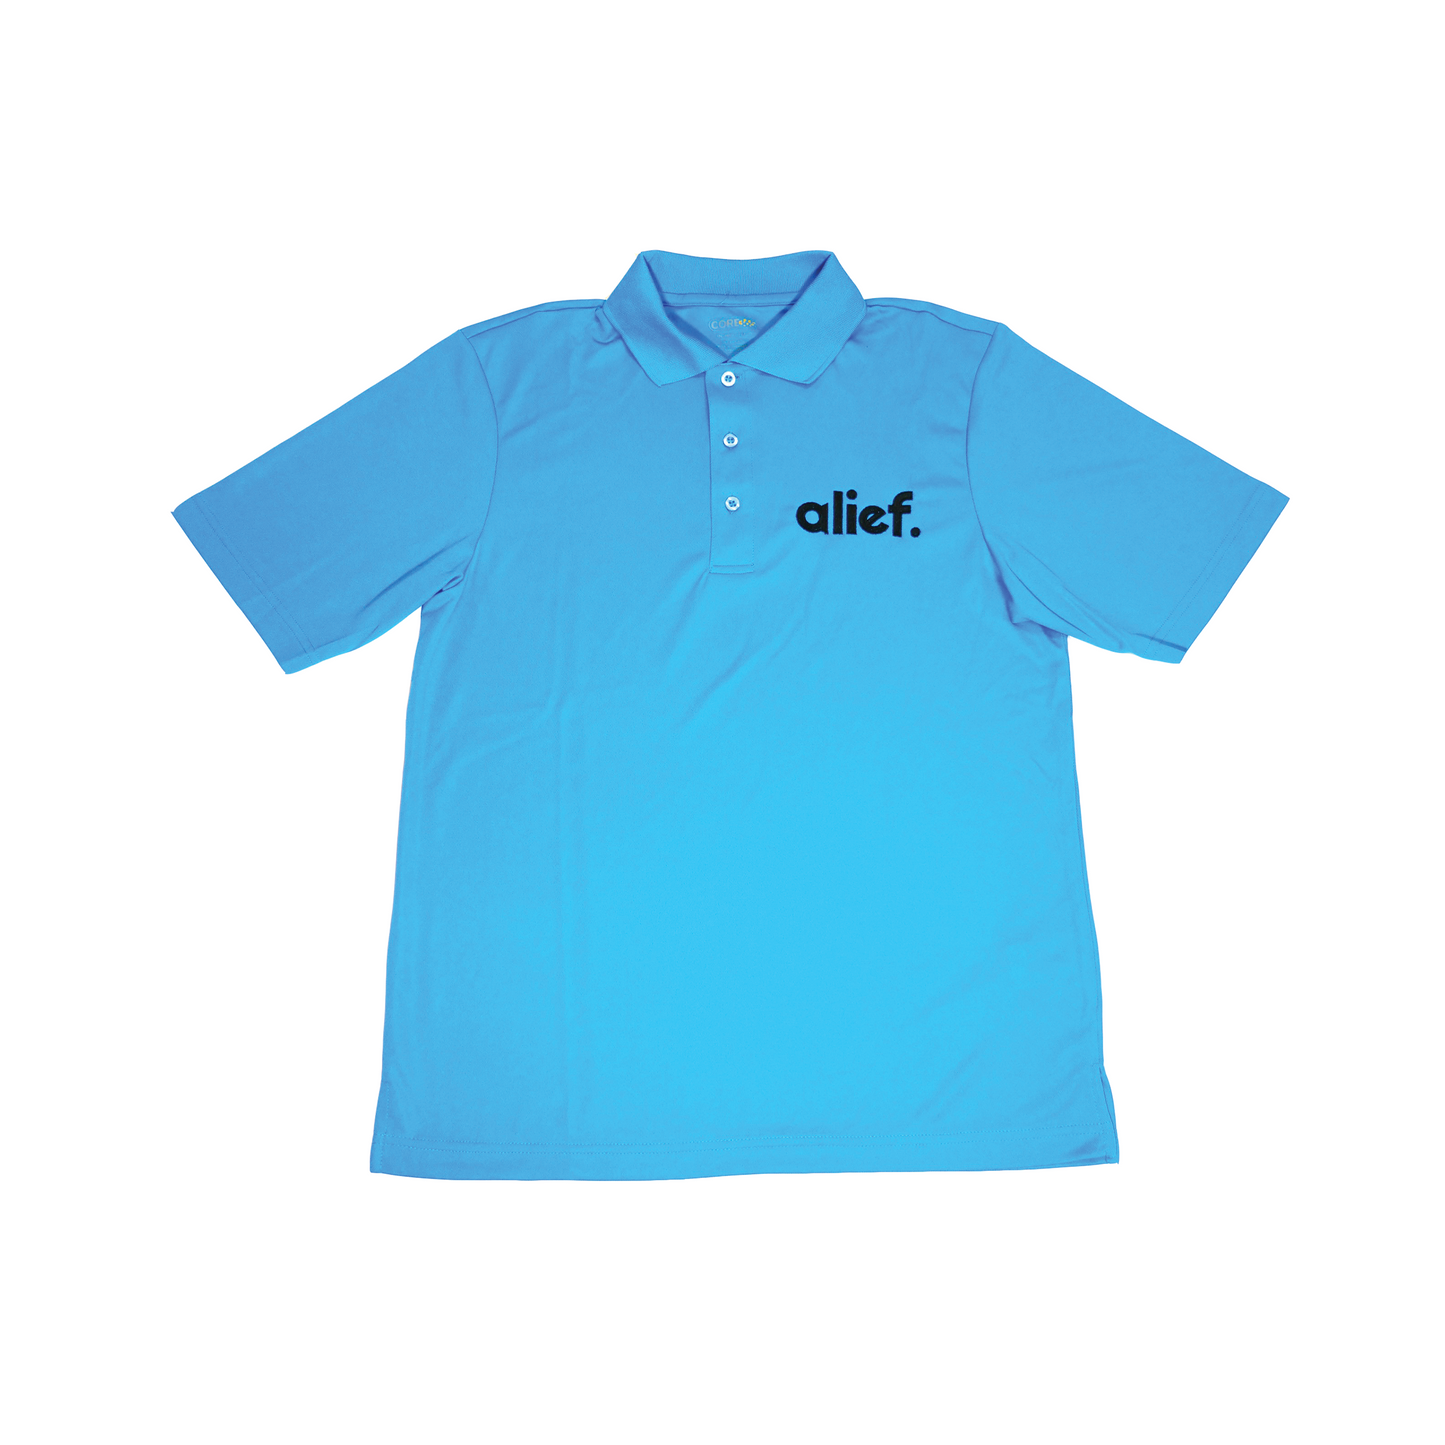 Embroidered Bold Alief Collar T-Shirts - Turquoise/ Black